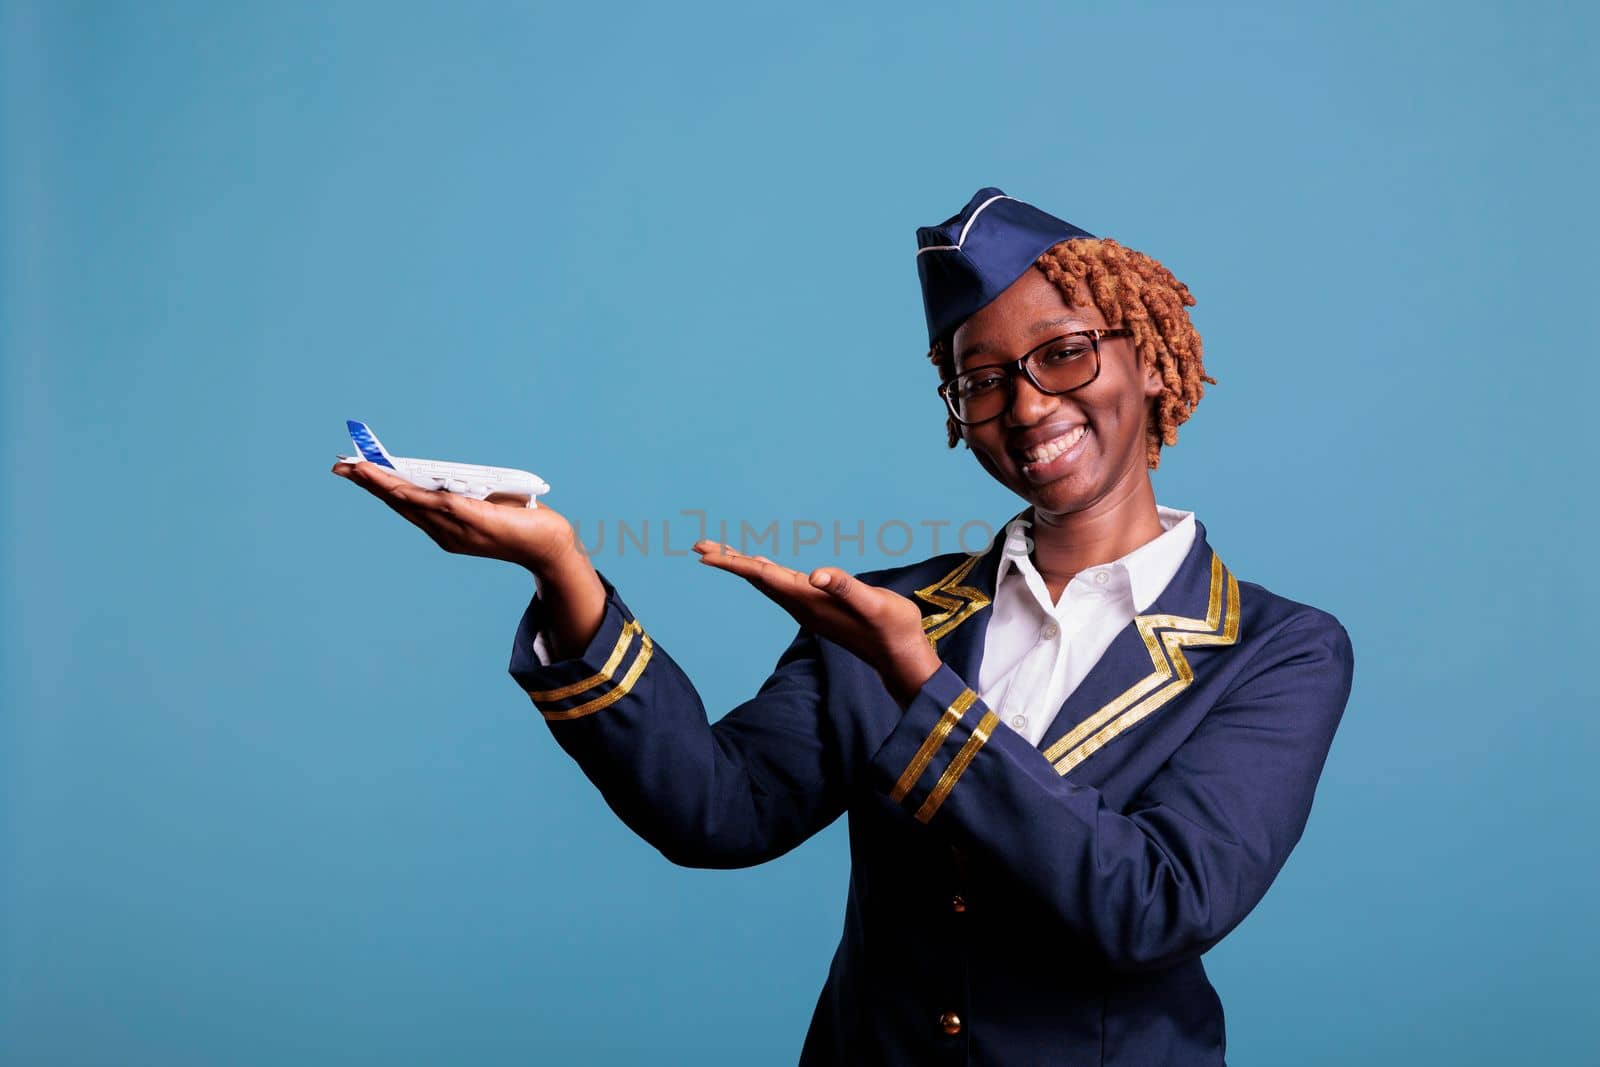 Smiling african american stewardess pointing at commercial airplane holding in hand for airline advertising. Flight attendant wearing crew members uniform in studio shot.